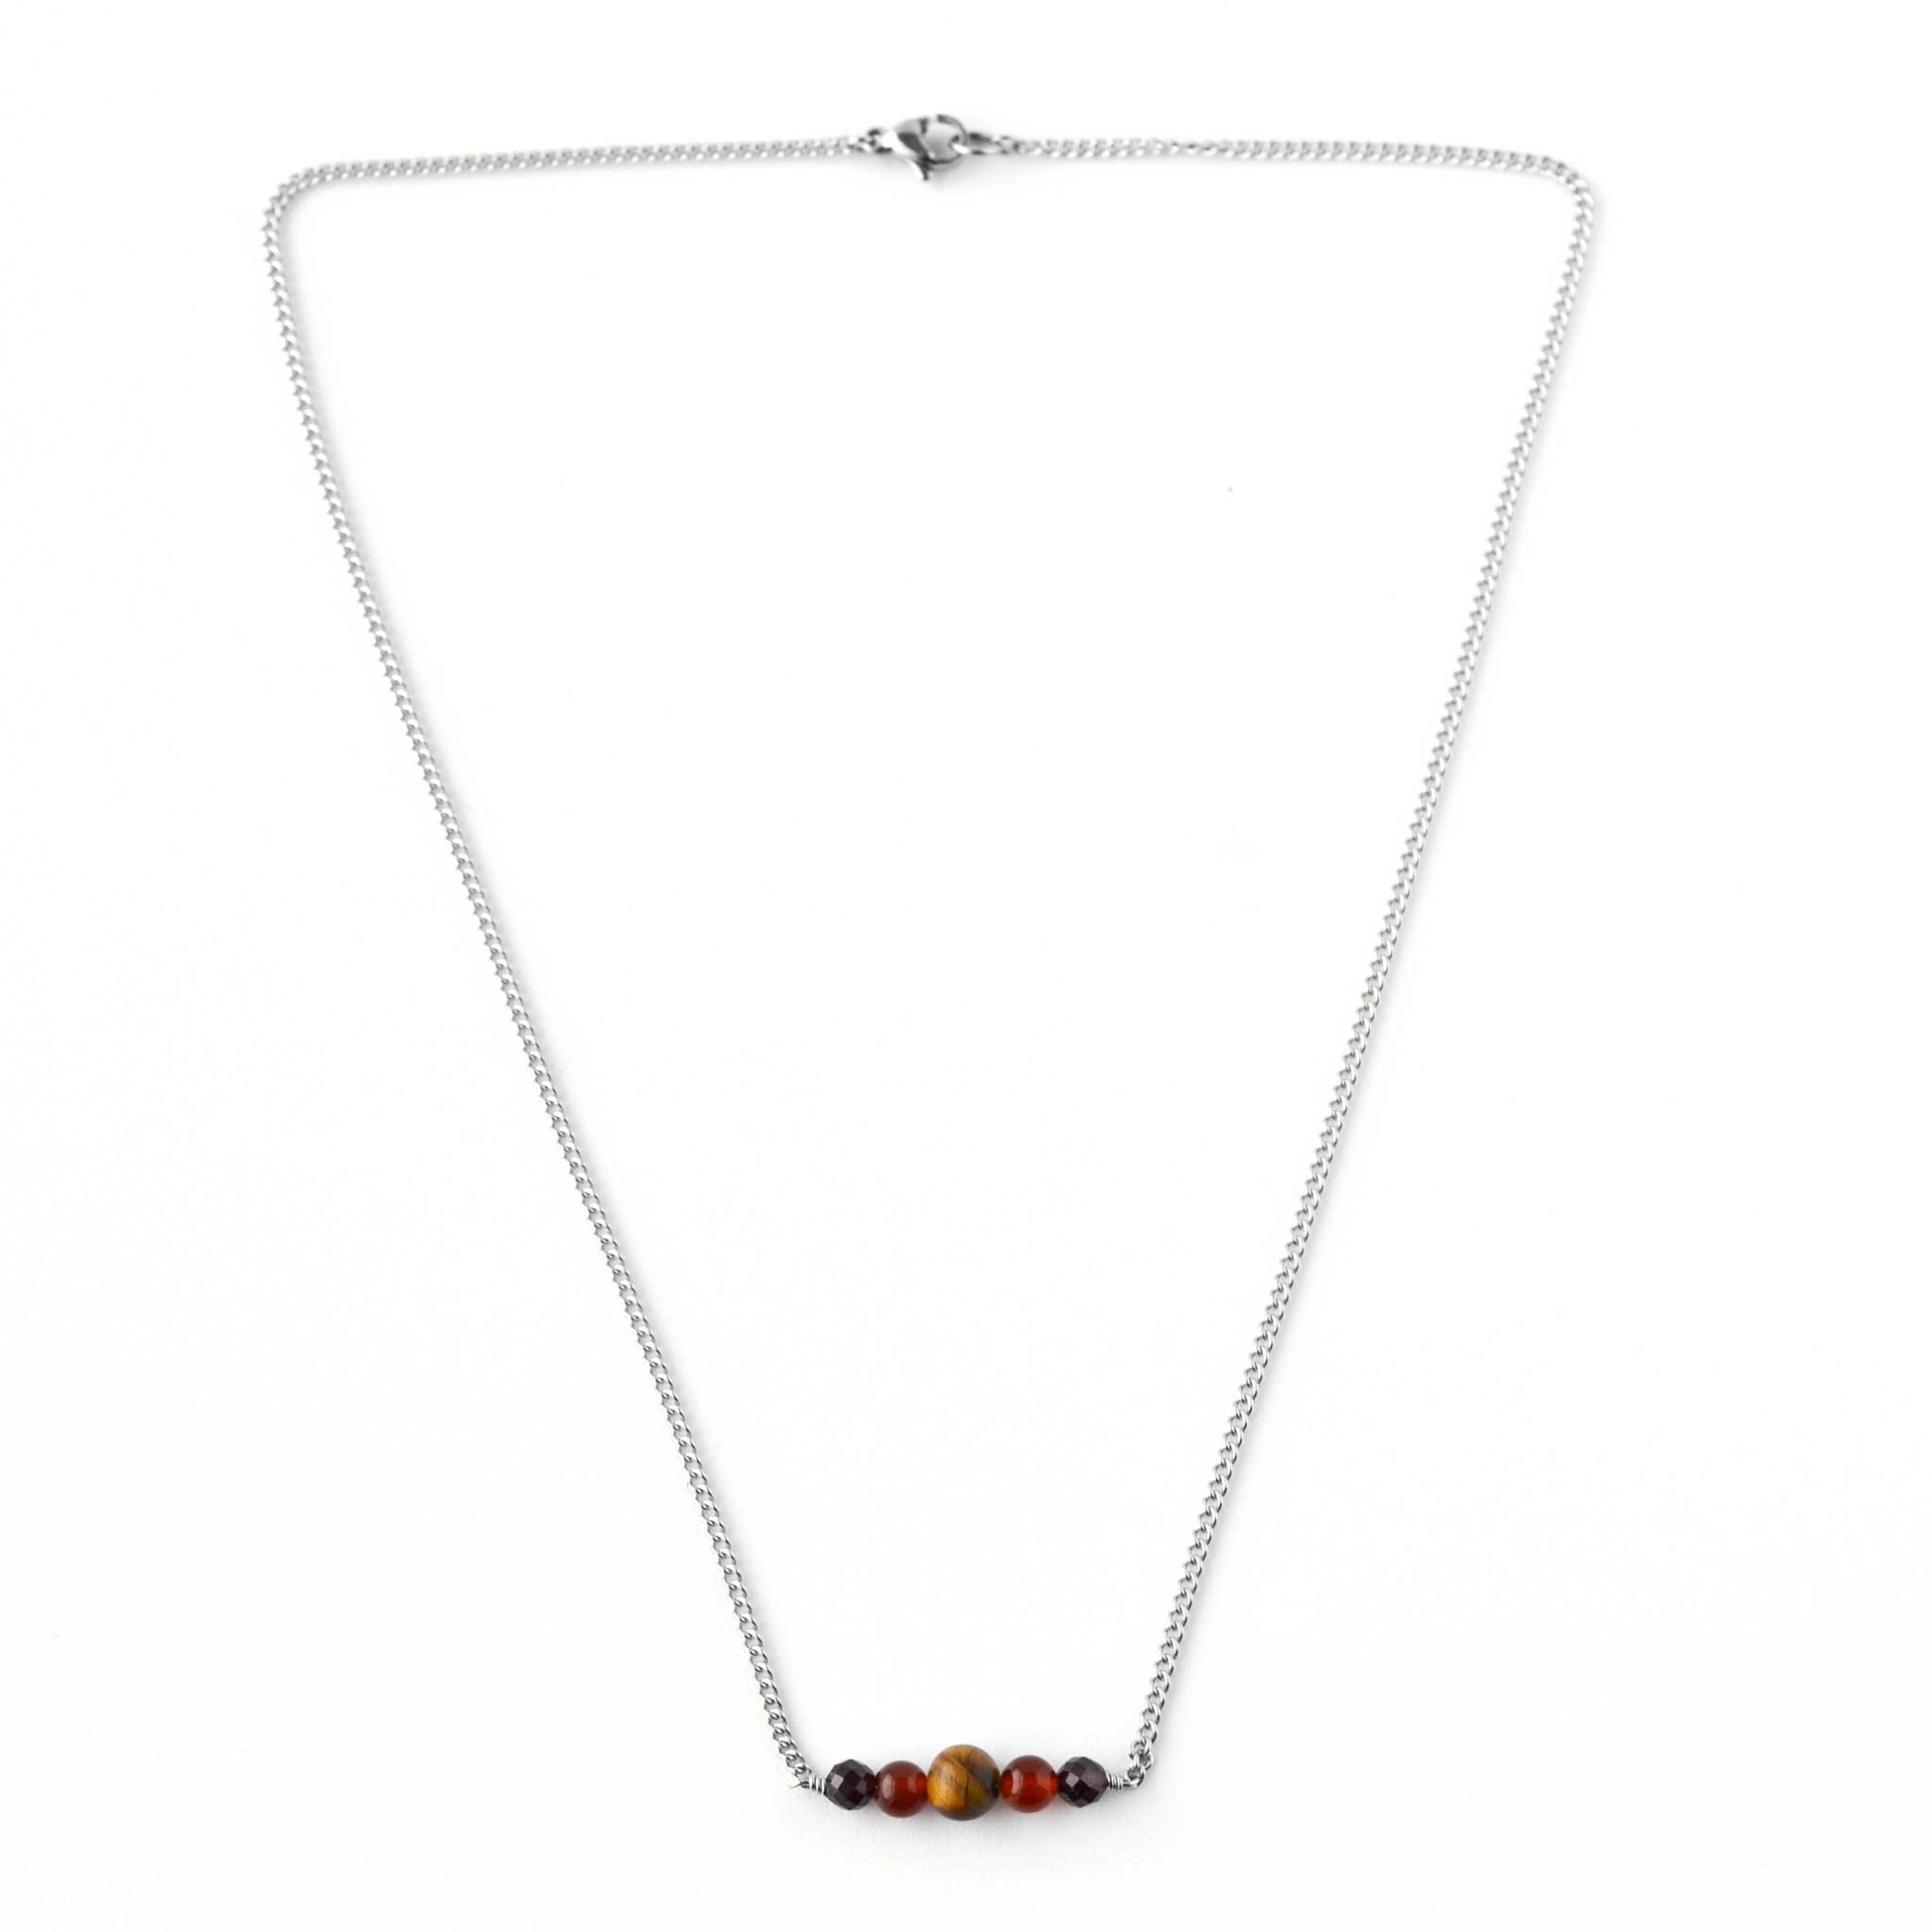 Flatlay of 18" dainty gemstone bead necklace on stainless steel chain with lobster clasp